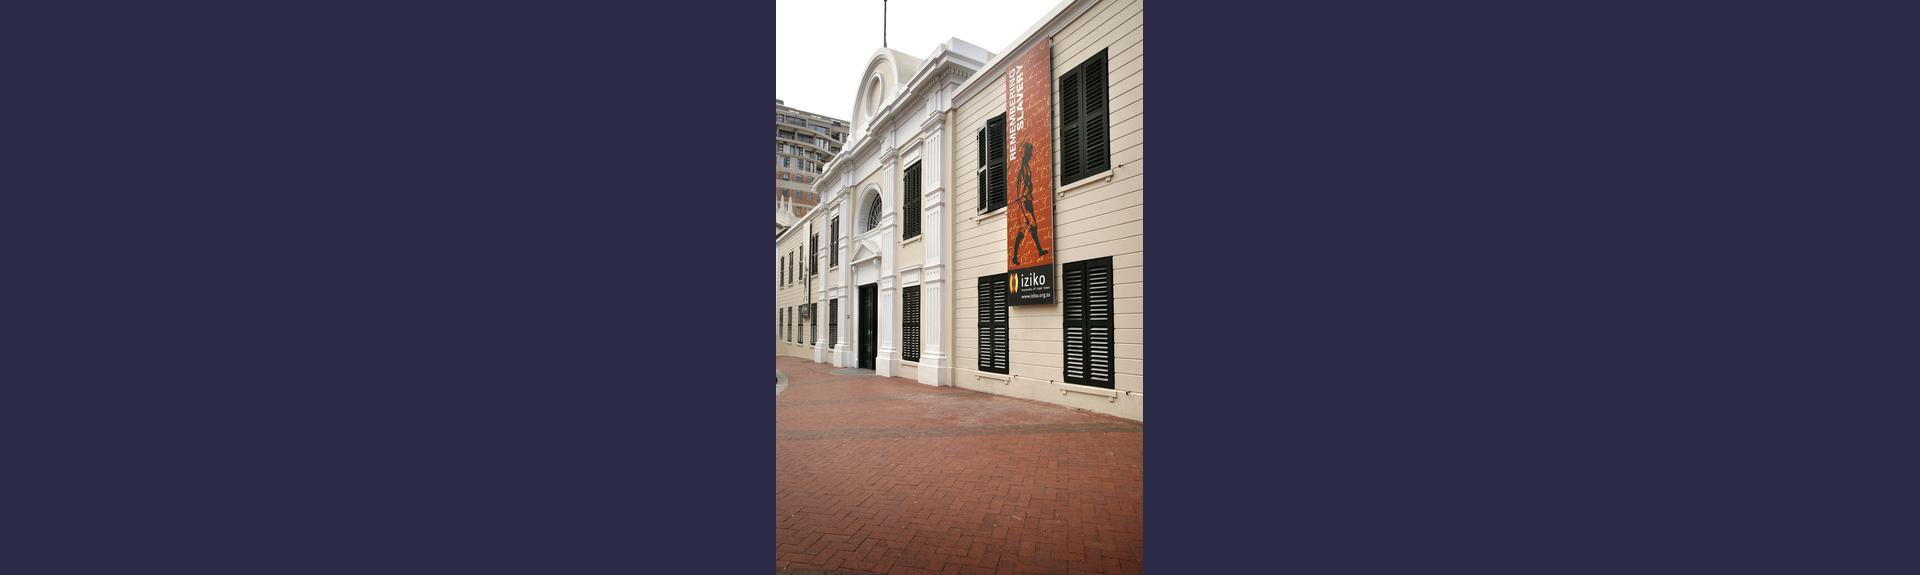 Iziko Slave Lodge | Cape Town | Activities and Attractions